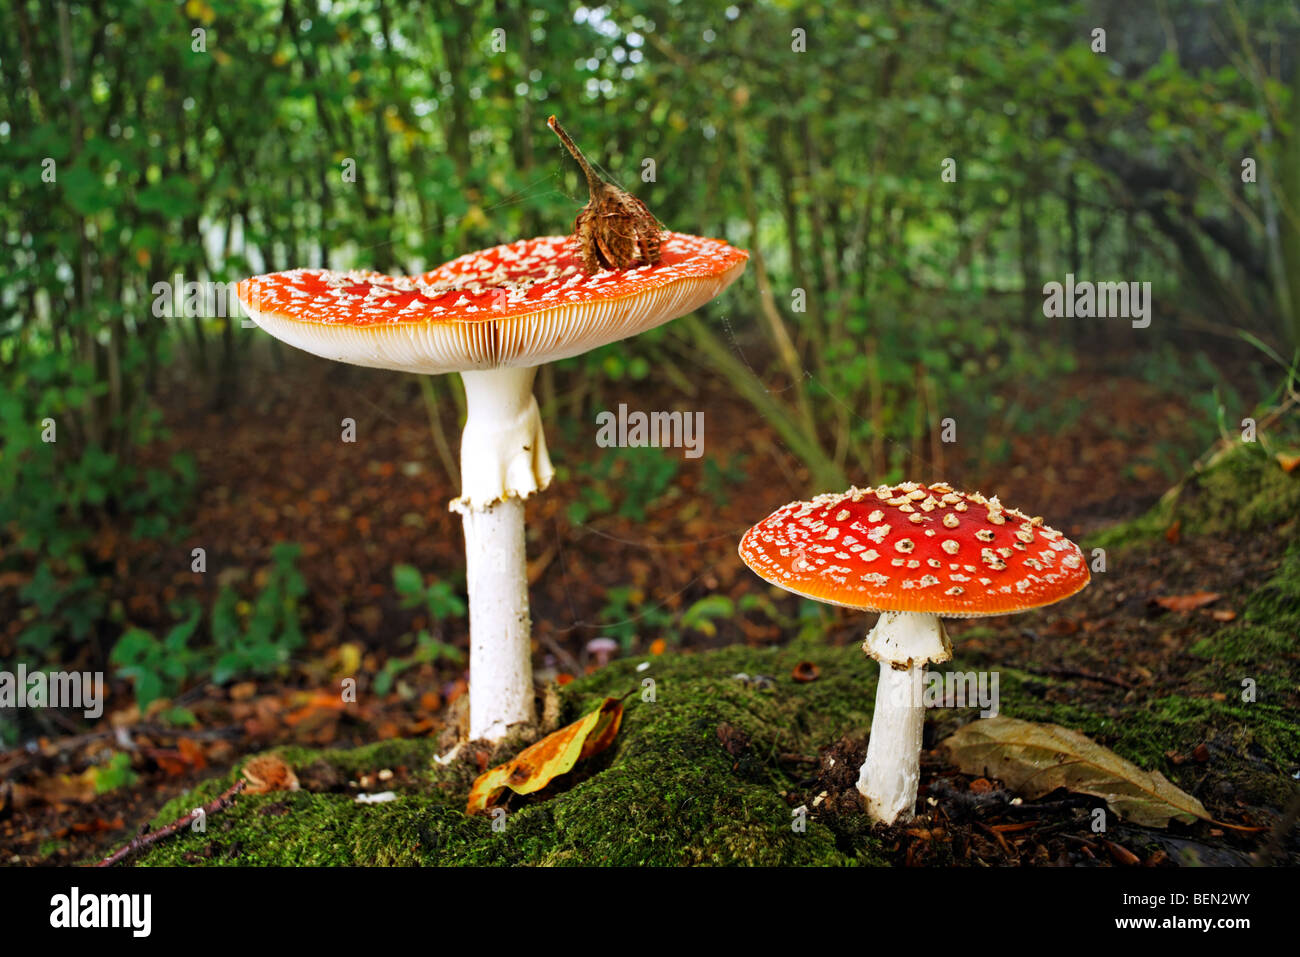 Two Fly agaric mushrooms (Amanita muscaria) in autumn forest Stock Photo